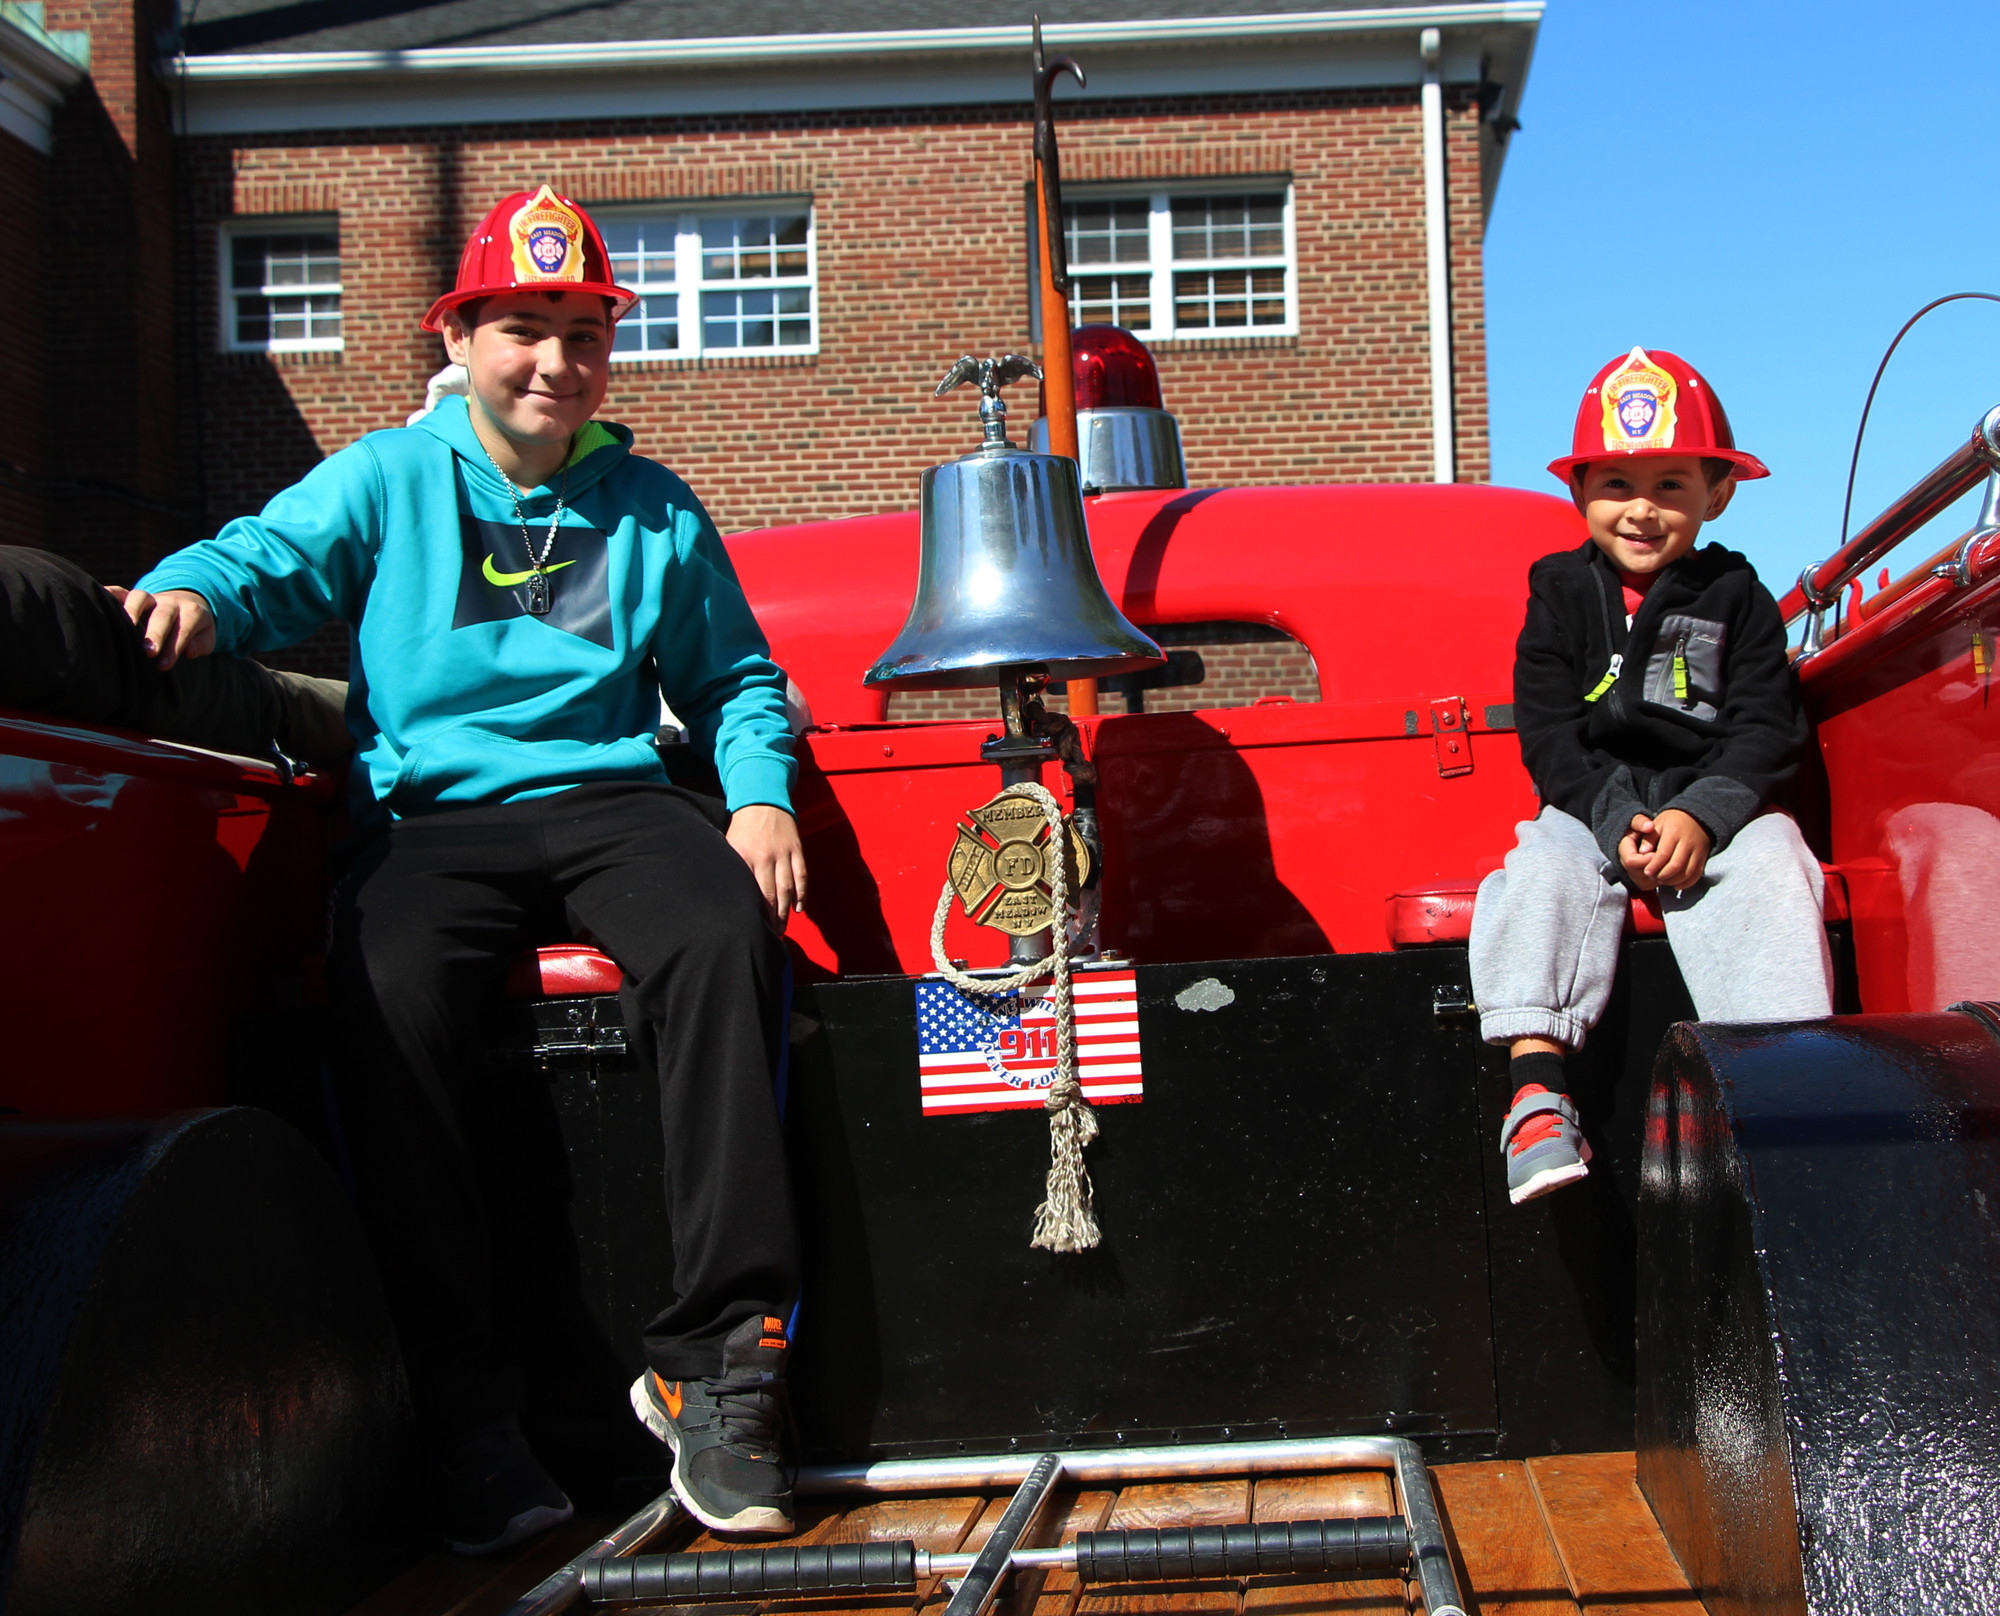 Antonio Bosotino, 12, and Christian Griparic, 4, atop an East Meadow fire truck, were all smiles.